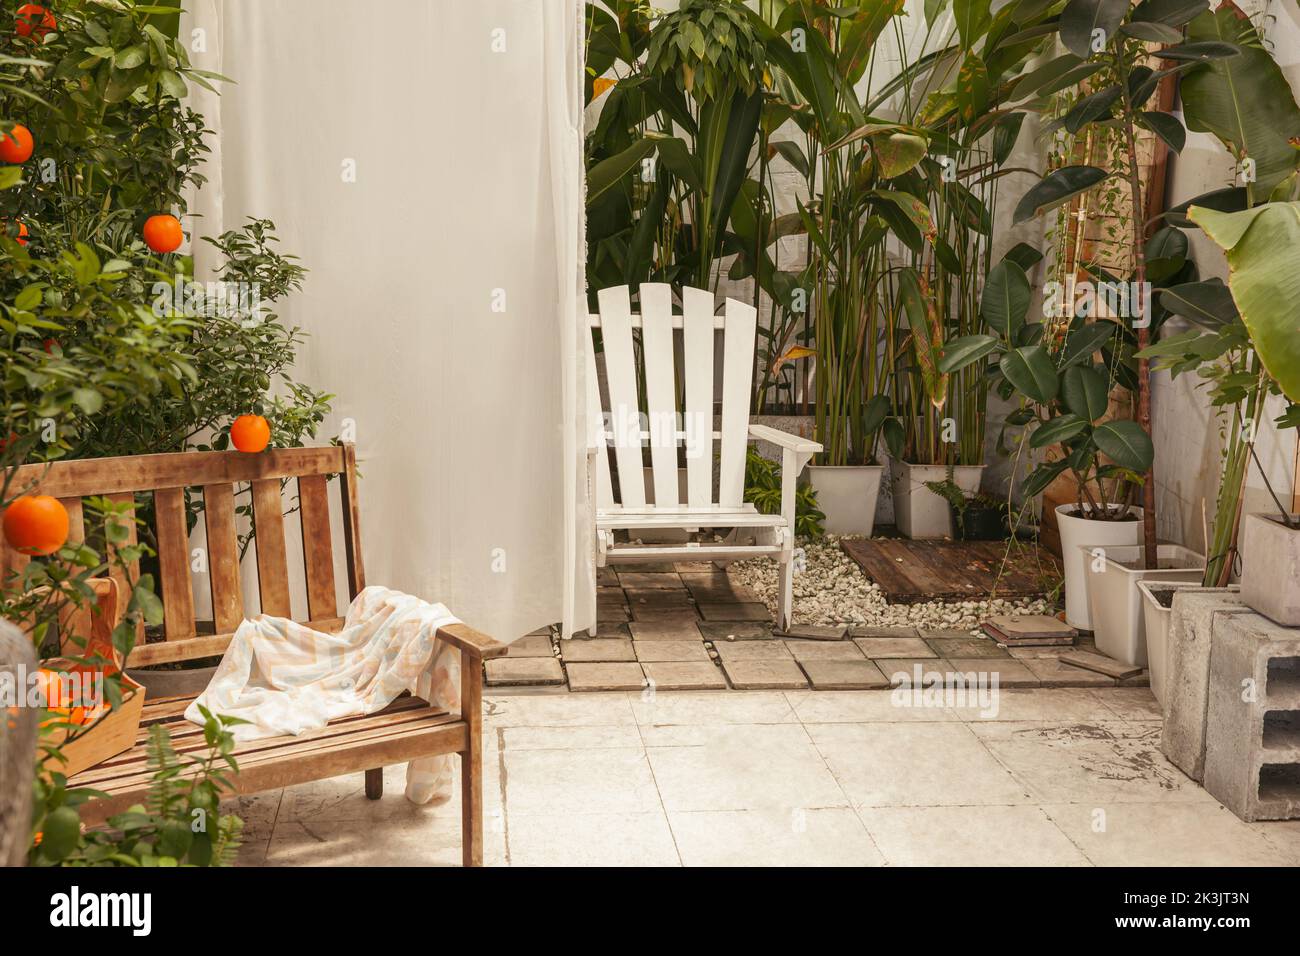 Vintage garden with wooden bench and white chair Stock Photo